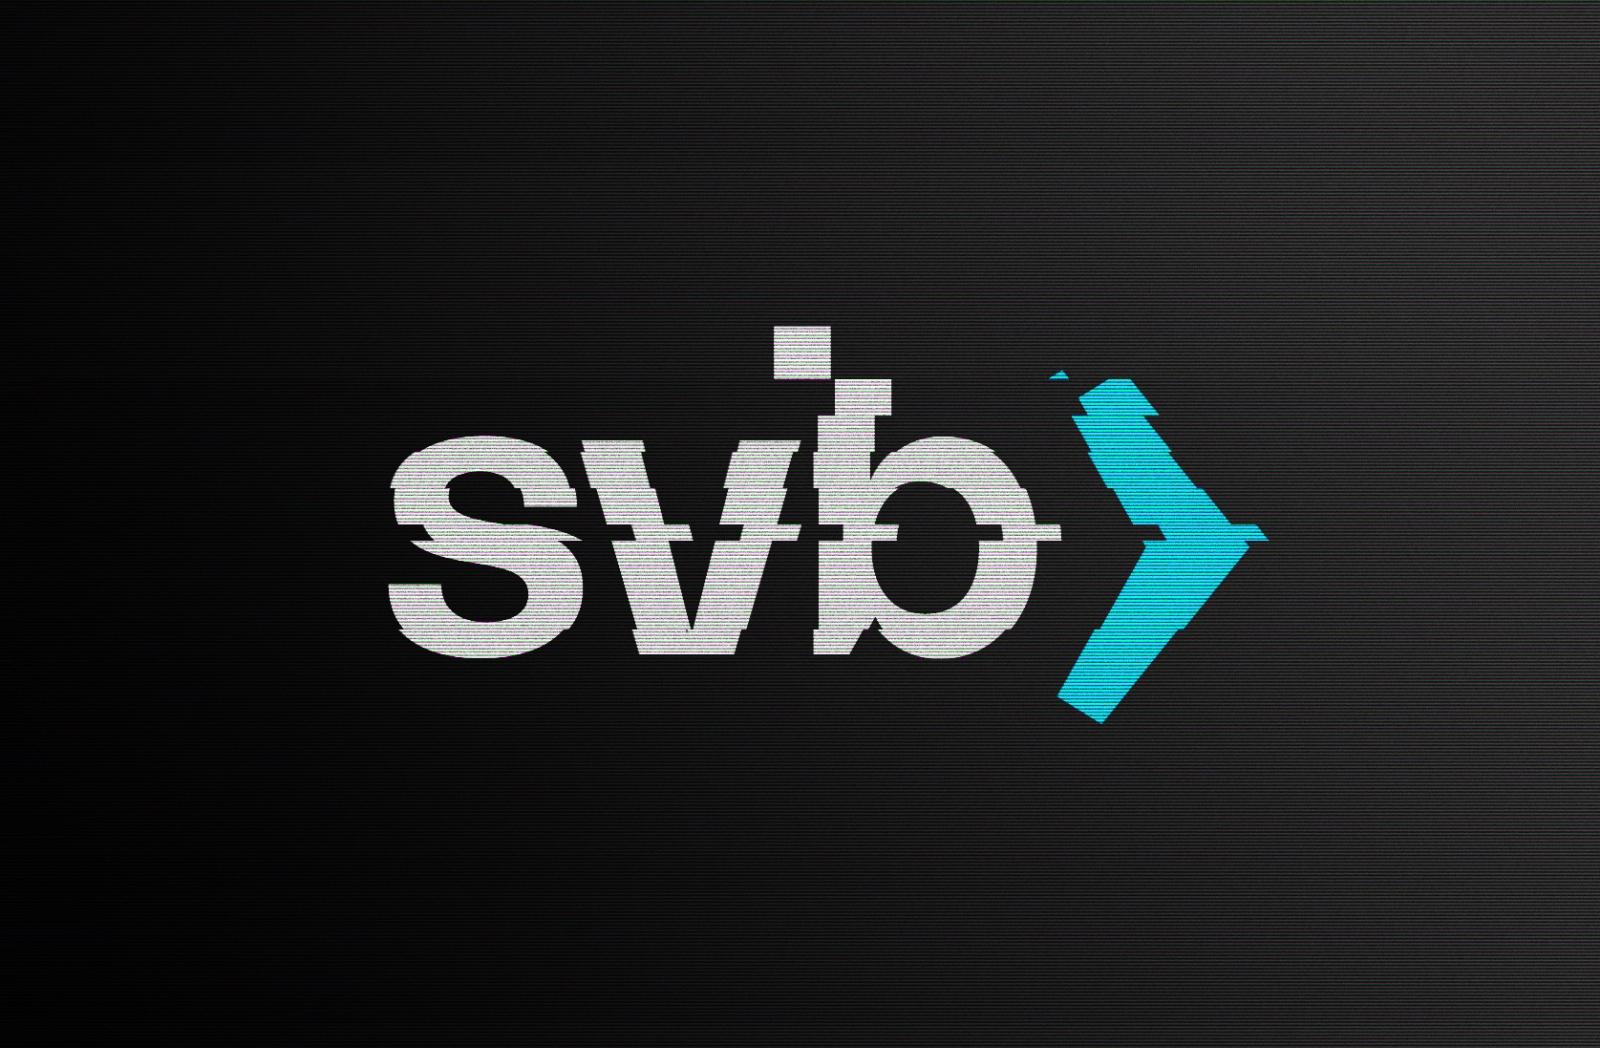 SVB Financial files for Ch. 11 bankruptcy protection, says it has $2.2B in liquidity